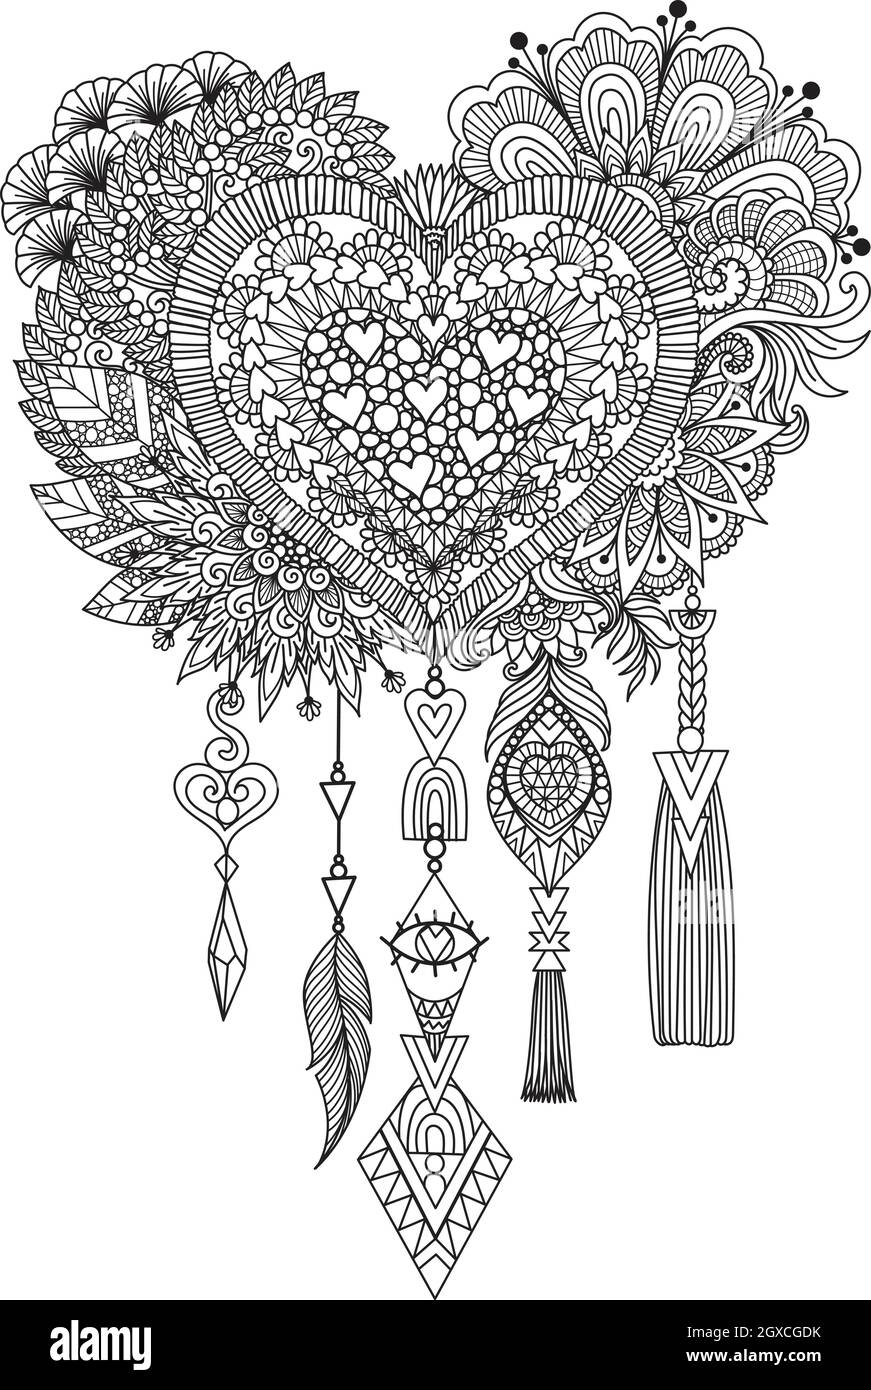 Heart shape dream catcher for coloring book, engraving or print on ...